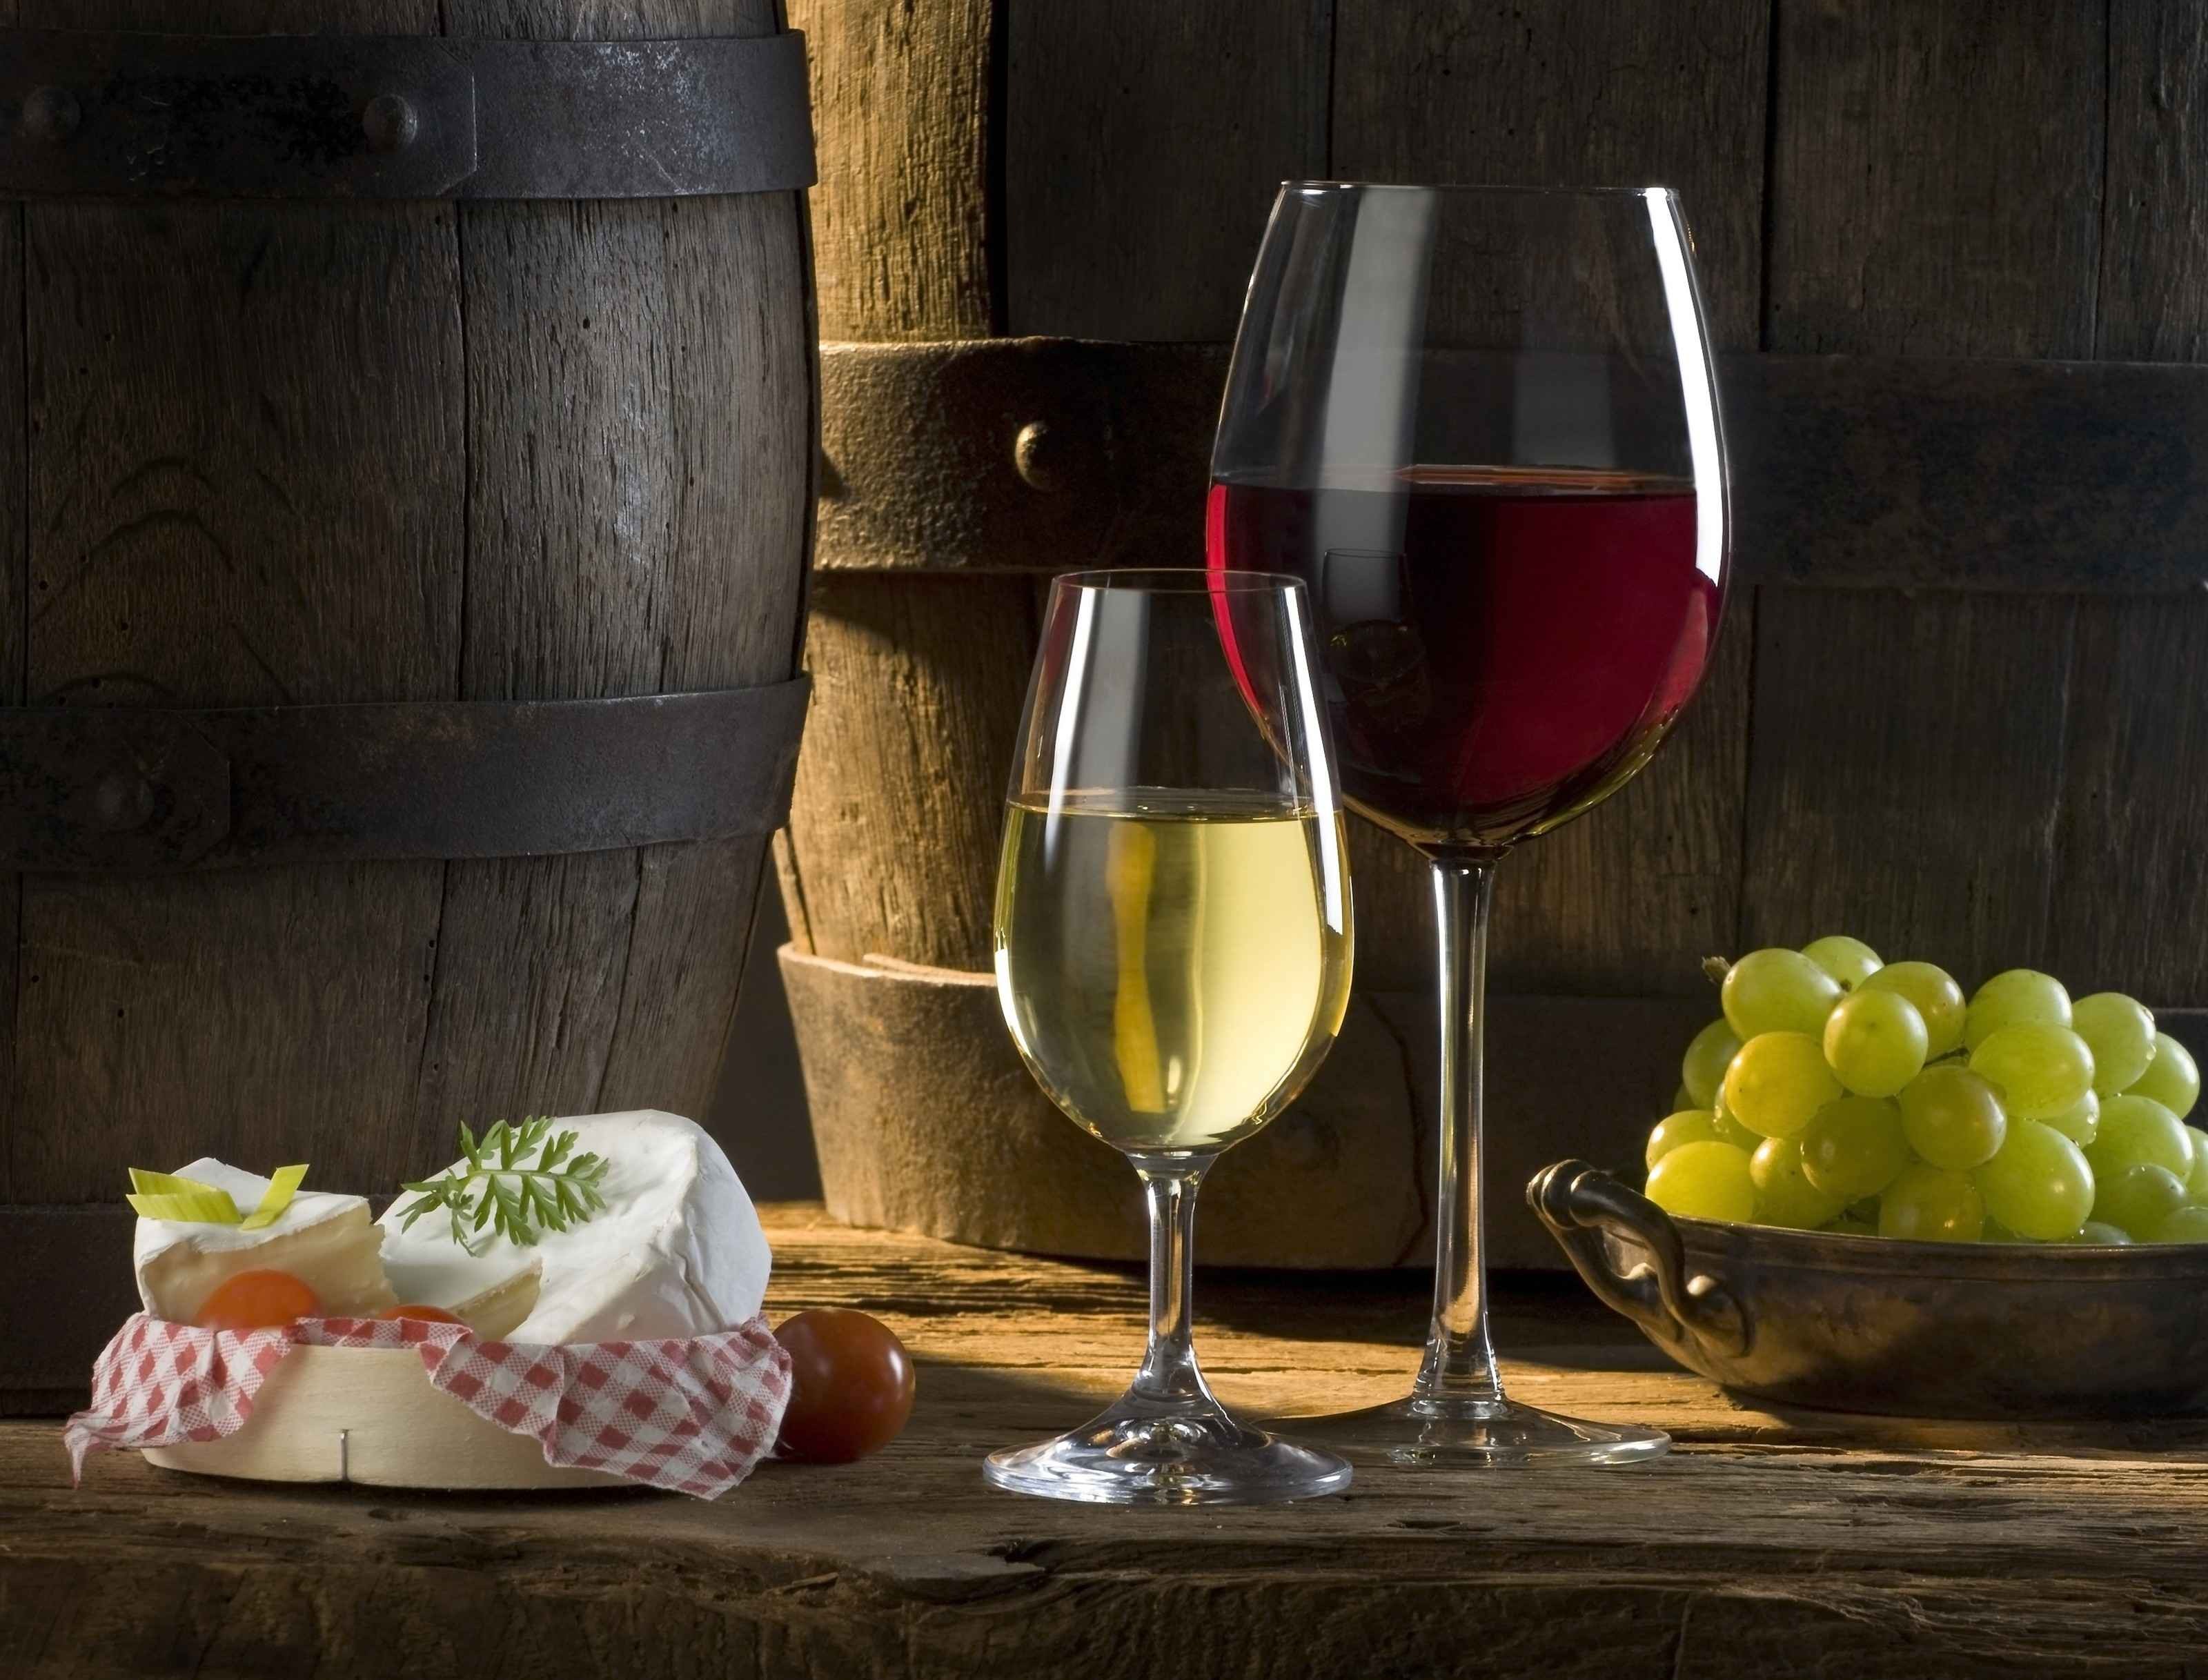 General 3200x2435 food fruit wine cheese drinking glass